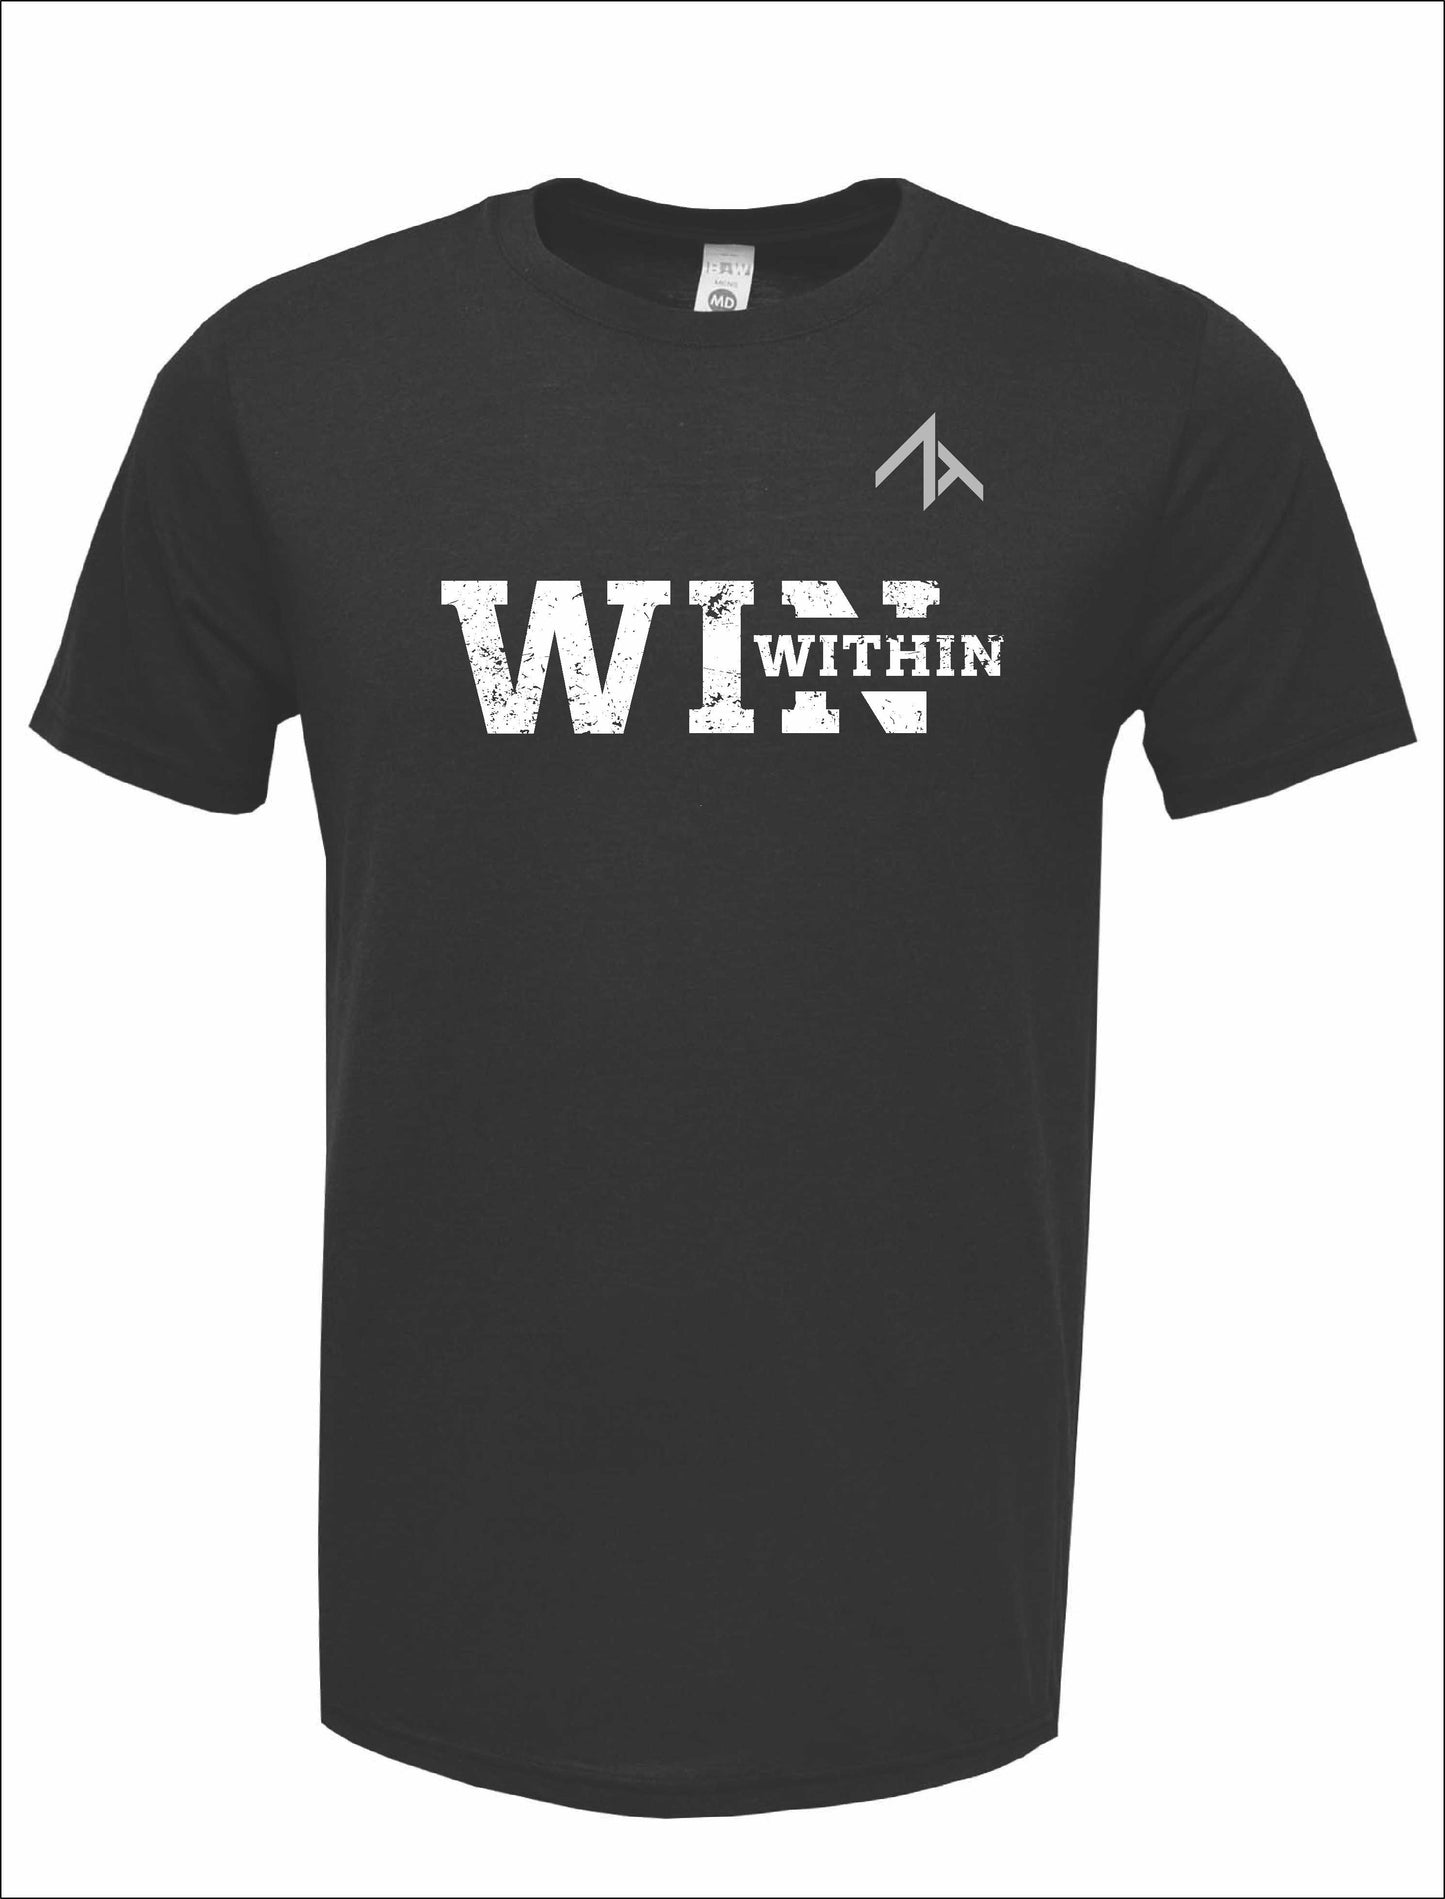 Short Sleeve "WIN WITHIN" Dri-fit T-Shirt